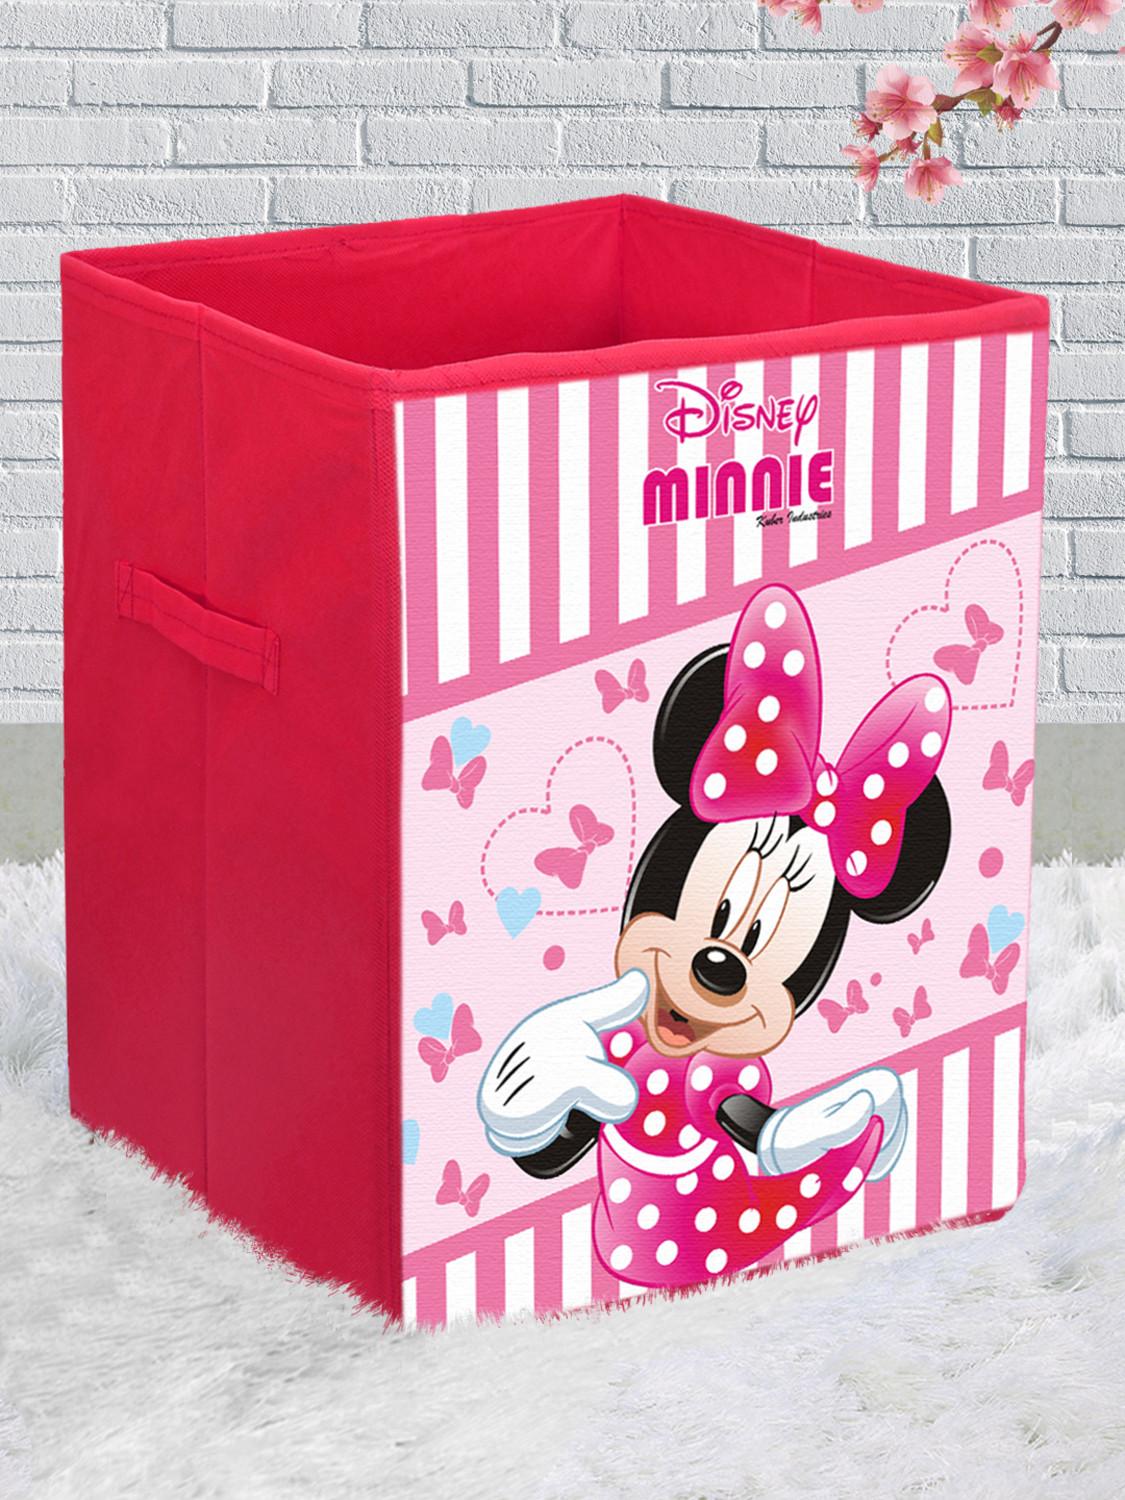 Kuber Industries Disney Minnie Print Non Woven Large Size Fabric Foldable Laundry Basket And Small Size Cube Toy,Books,Shoes Storage Box With Handle (Set Of 2, Pink)-KUBMRT11895